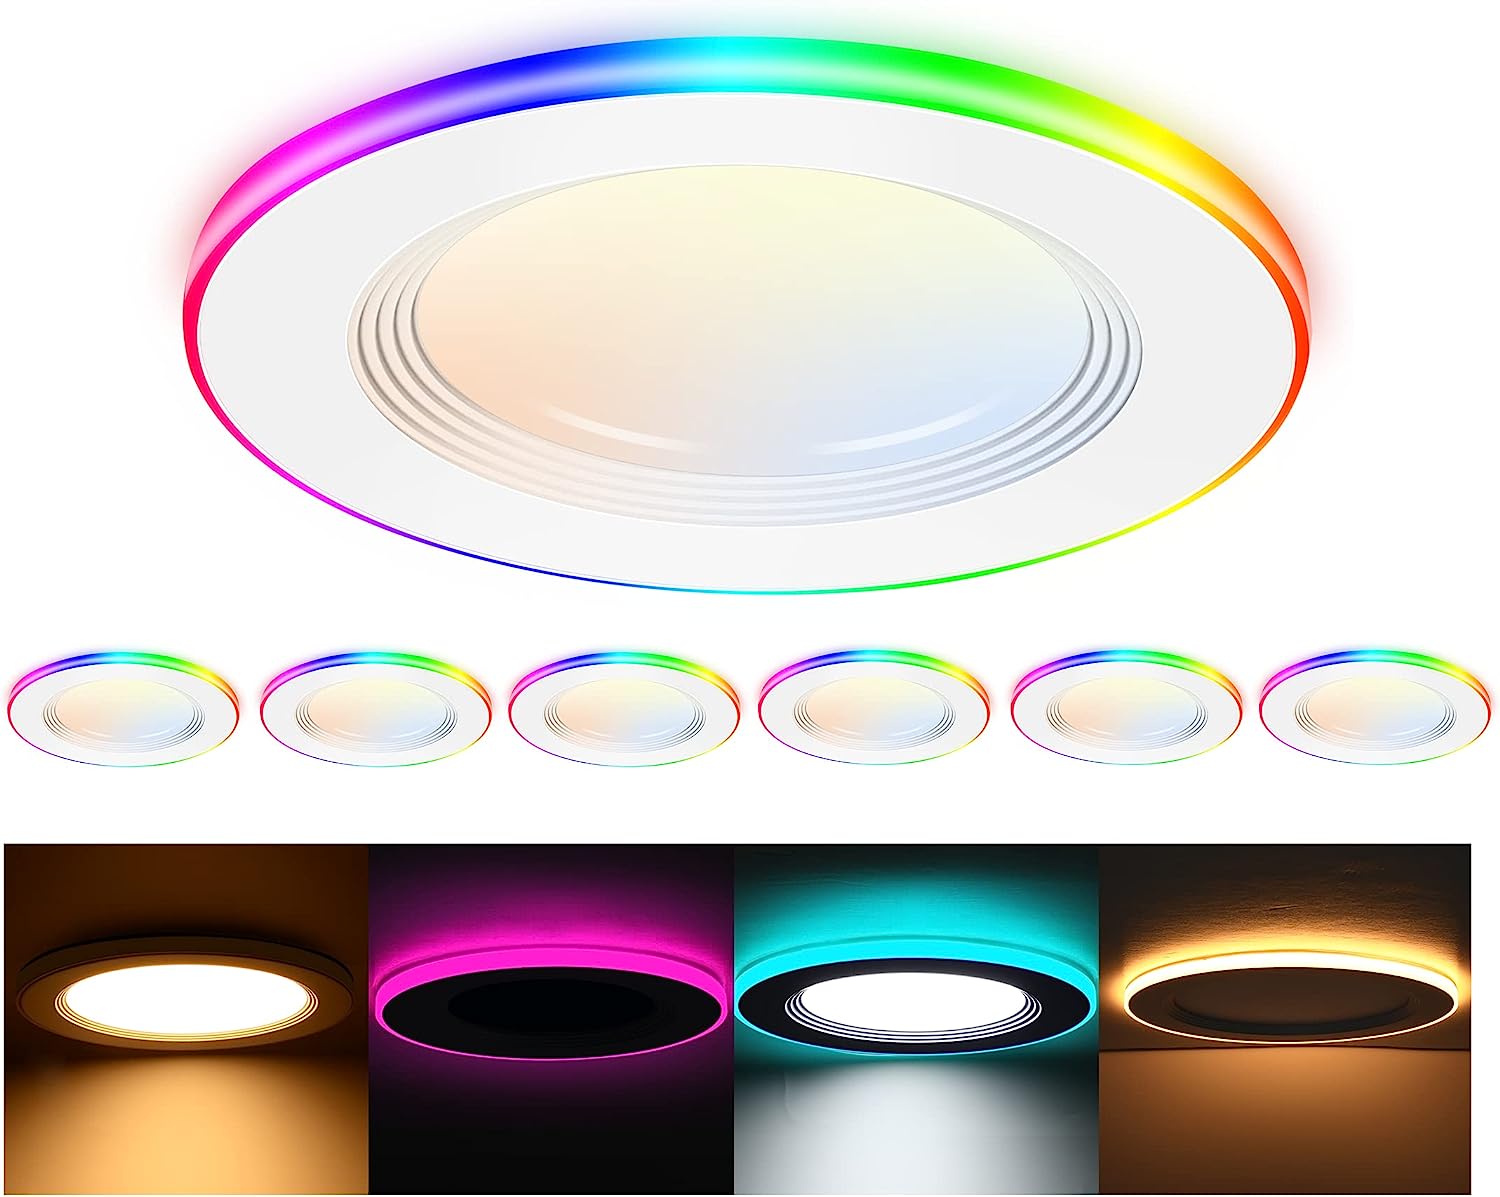 [6 Pack] 4 Inch Smart LED Recessed Ceiling Light with RGB Back Light,10W 2700K-6500K,2W Color Changing Ultra-Thin Recessed Lighting,Canless Baffle Trim Wafer Downlight